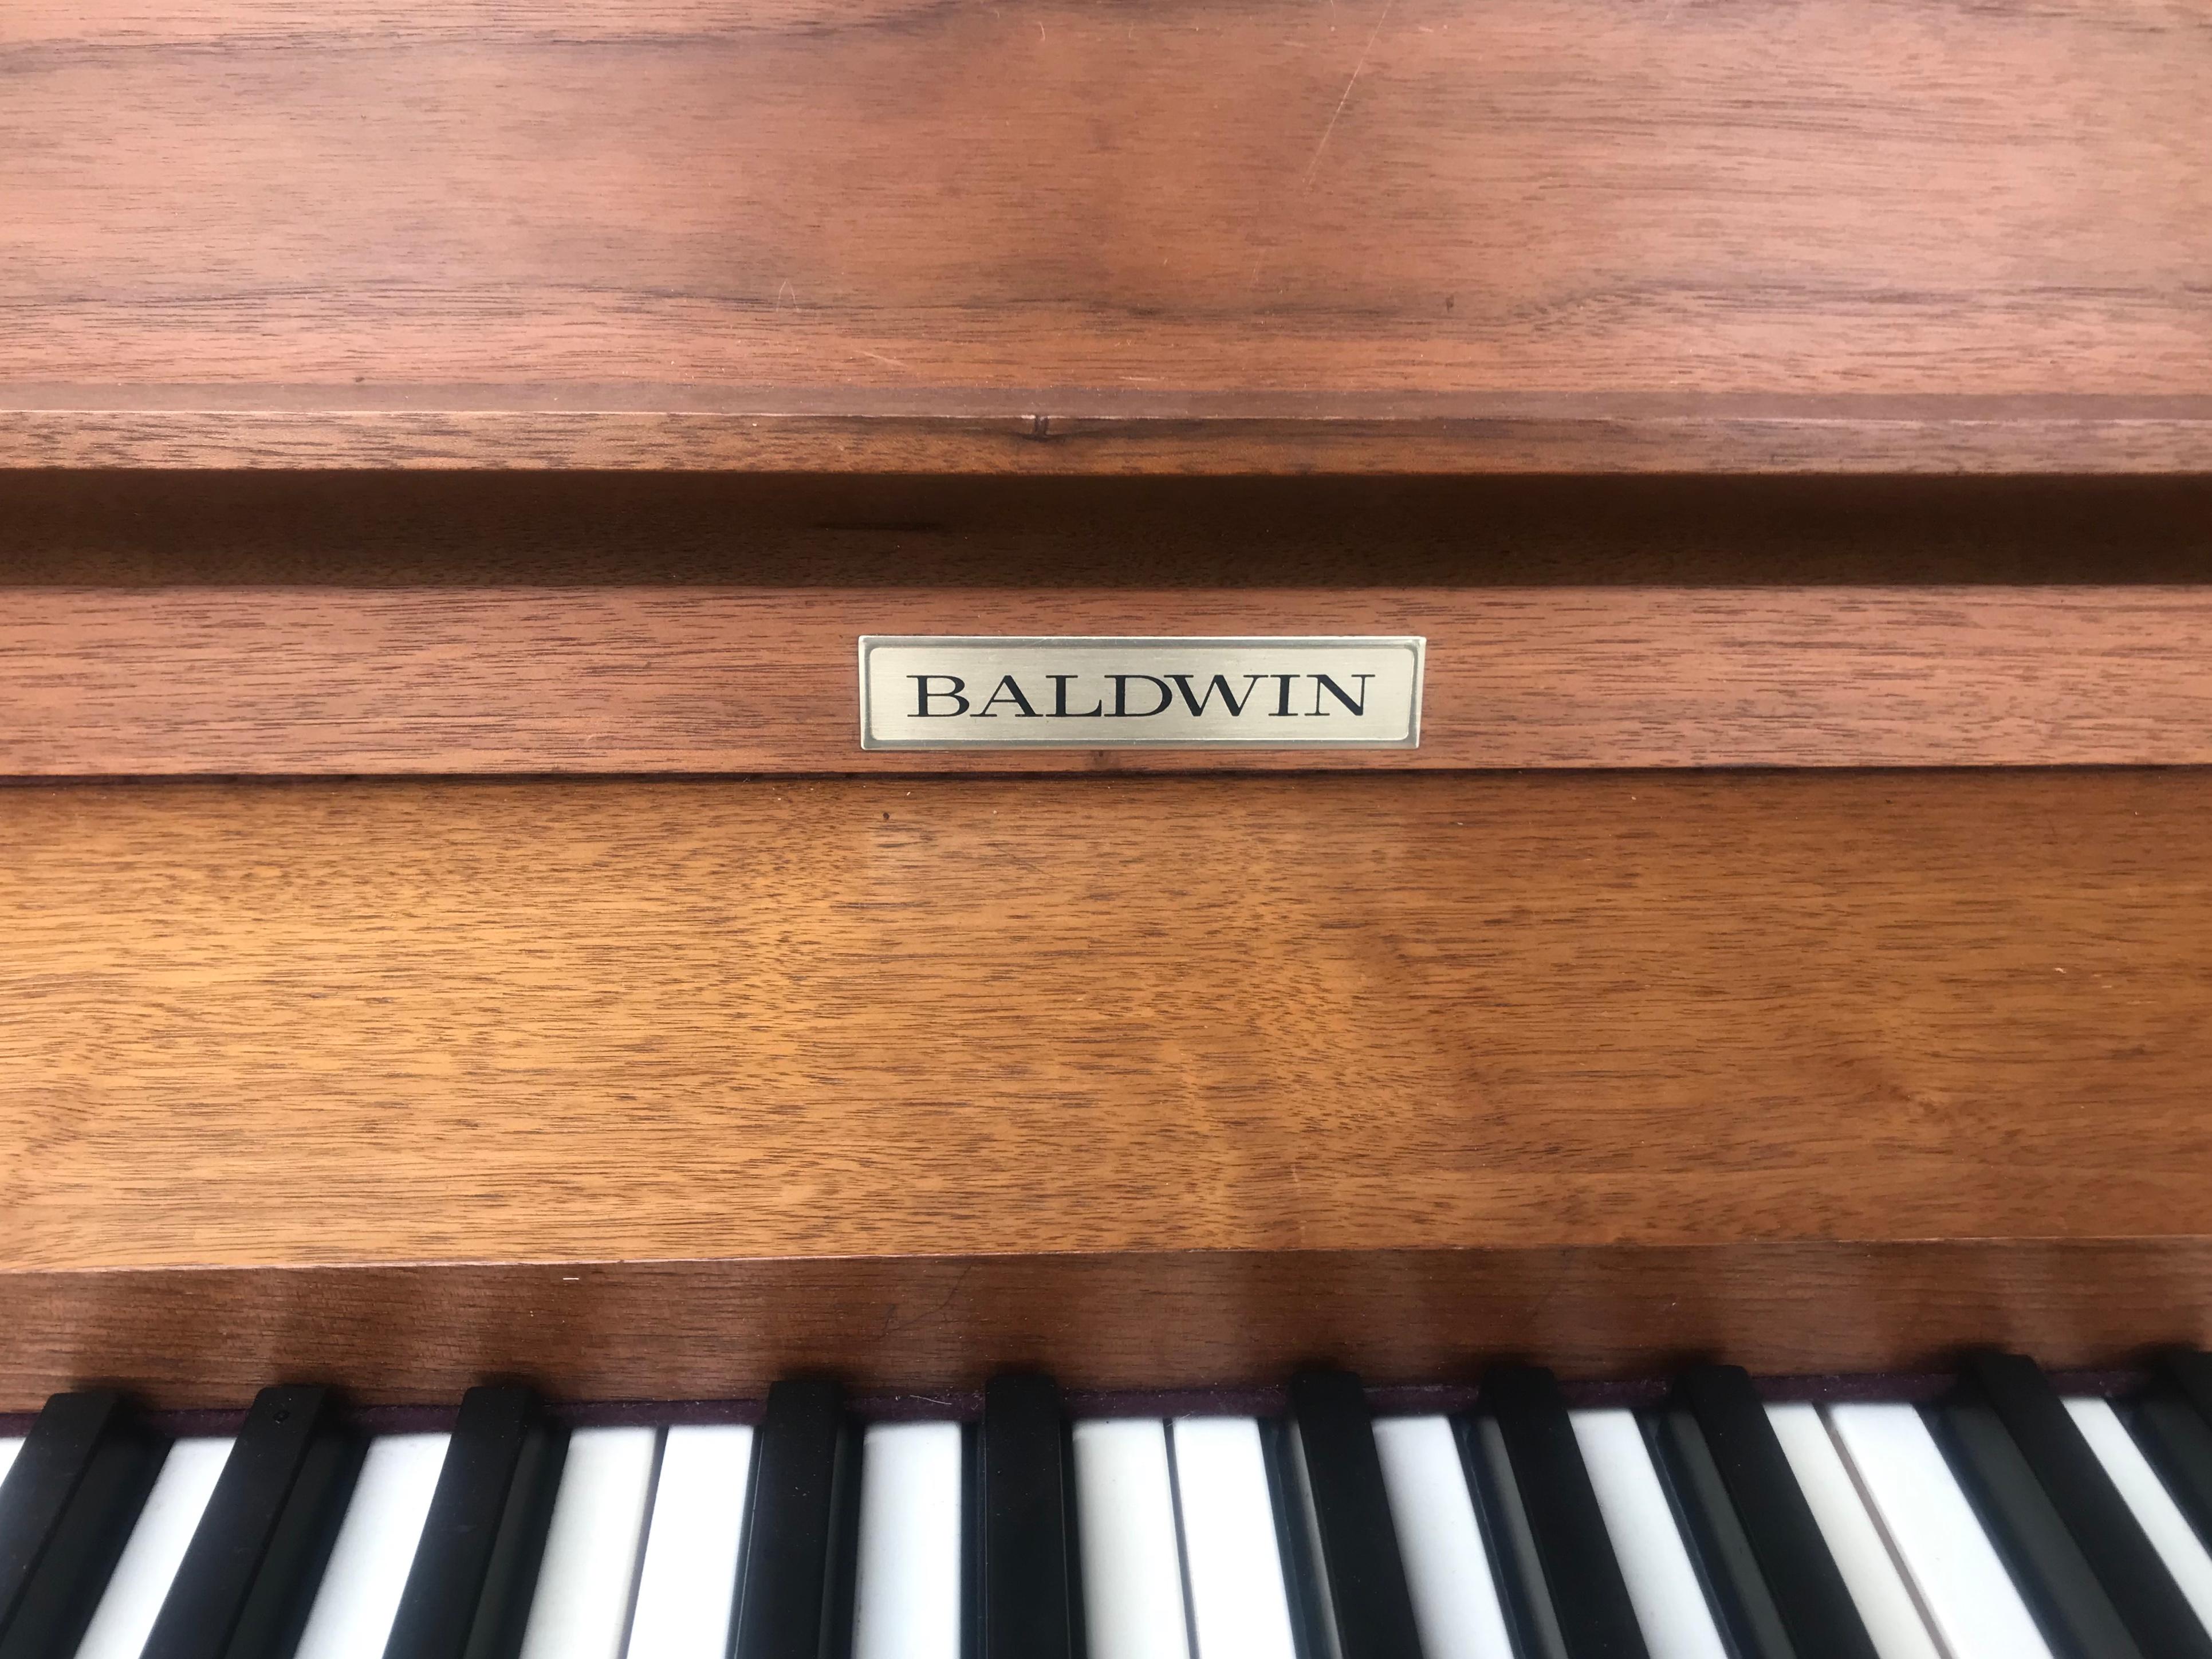 Gorgeous Mid-Century Modern Baldwin Acrosonic spinet piano, note the dramatic angled legs and striking wood grain. The back side of the piano is fully finished with walnut and caned panels so it can be placed anywhere in a room, small in size, big